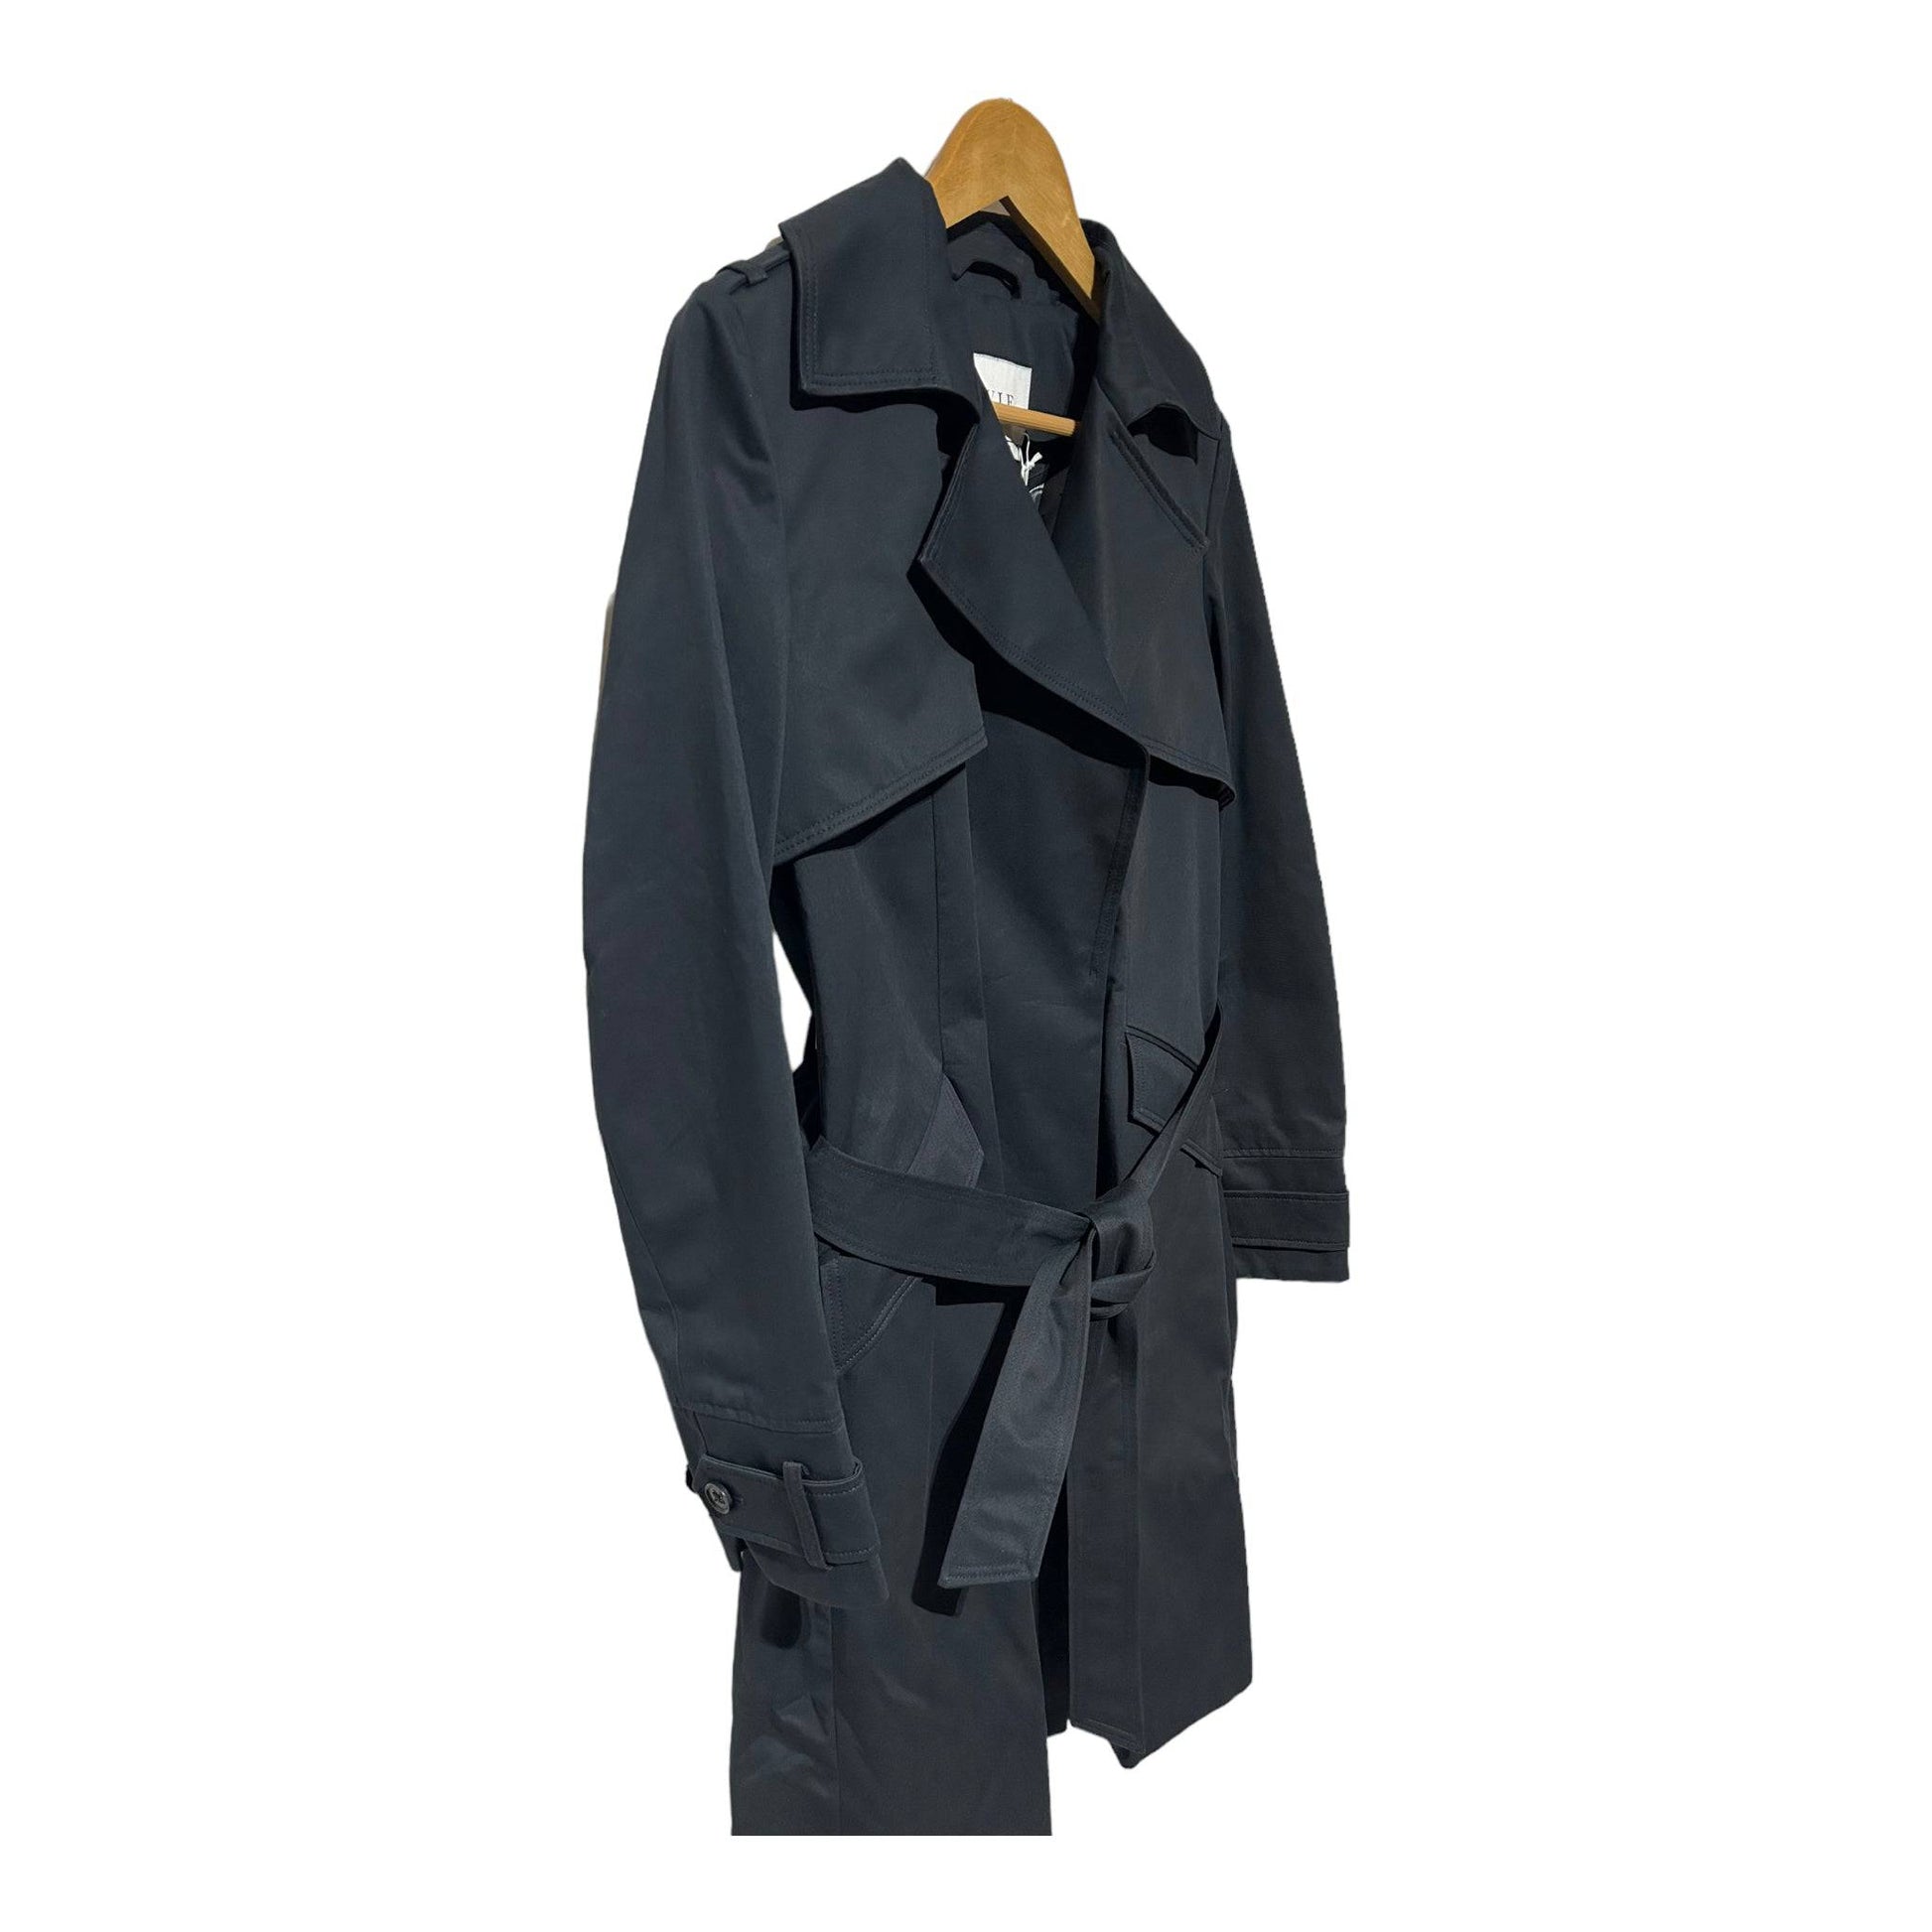 Avie The Trench 1.0 Jacket - Recurring.Life